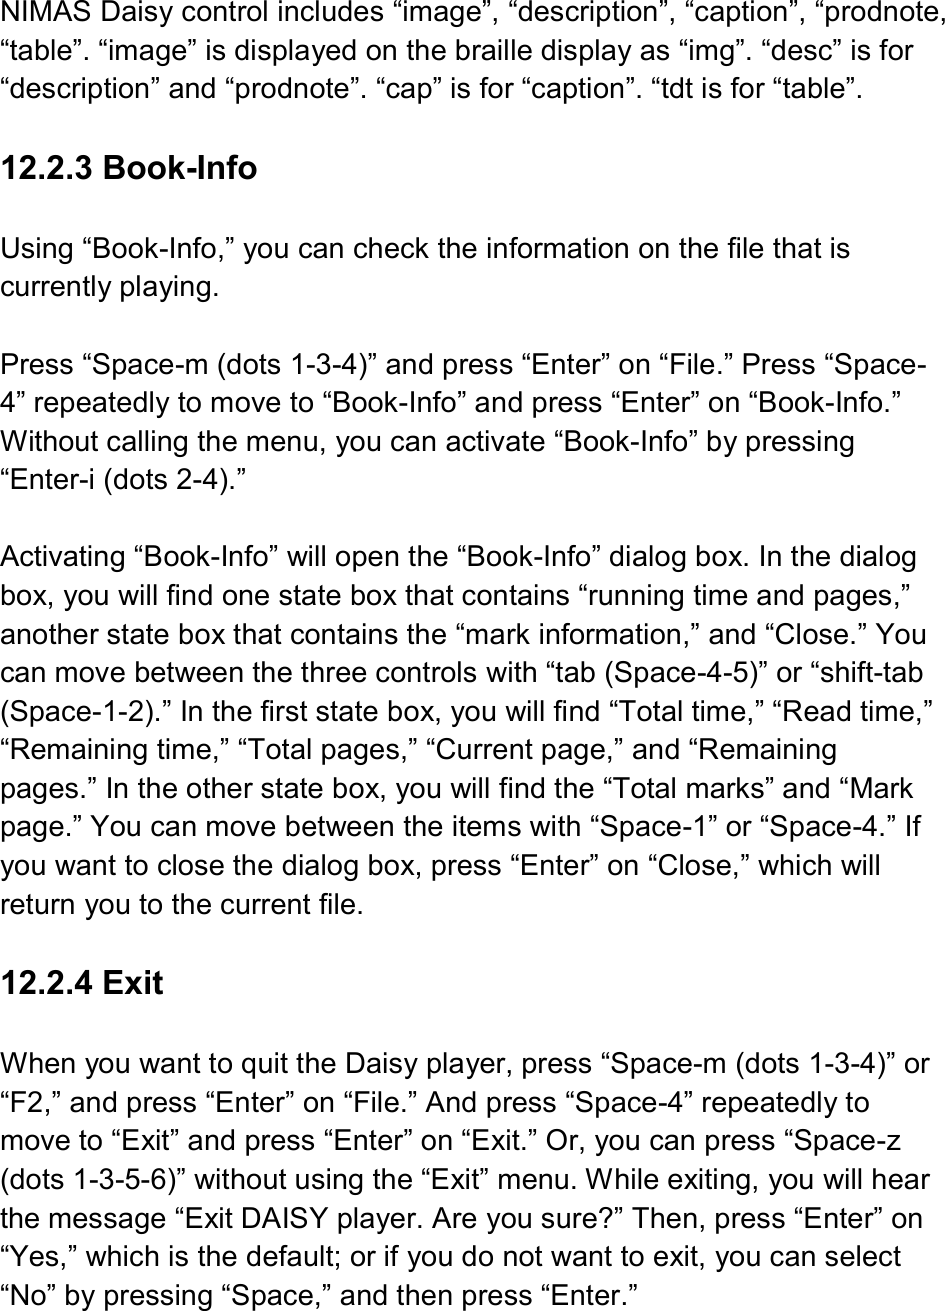  NIMAS Daisy control includes “image”, “description”, “caption”, “prodnote, “table”. “image” is displayed on the braille display as “img”. “desc” is for “description” and “prodnote”. “cap” is for “caption”. “tdt is for “table”.  12.2.3 Book-Info  Using “Book-Info,” you can check the information on the file that is currently playing.    Press “Space-m (dots 1-3-4)” and press “Enter” on “File.” Press “Space-4” repeatedly to move to “Book-Info” and press “Enter” on “Book-Info.” Without calling the menu, you can activate “Book-Info” by pressing “Enter-i (dots 2-4).”  Activating “Book-Info” will open the “Book-Info” dialog box. In the dialog box, you will find one state box that contains “running time and pages,” another state box that contains the “mark information,” and “Close.” You can move between the three controls with “tab (Space-4-5)” or “shift-tab (Space-1-2).” In the first state box, you will find “Total time,” “Read time,” “Remaining time,” “Total pages,” “Current page,” and “Remaining pages.” In the other state box, you will find the “Total marks” and “Mark page.” You can move between the items with “Space-1” or “Space-4.” If you want to close the dialog box, press “Enter” on “Close,” which will return you to the current file.  12.2.4 Exit  When you want to quit the Daisy player, press “Space-m (dots 1-3-4)” or “F2,” and press “Enter” on “File.” And press “Space-4” repeatedly to move to “Exit” and press “Enter” on “Exit.” Or, you can press “Space-z (dots 1-3-5-6)” without using the “Exit” menu. While exiting, you will hear the message “Exit DAISY player. Are you sure?” Then, press “Enter” on “Yes,” which is the default; or if you do not want to exit, you can select “No” by pressing “Space,” and then press “Enter.”  